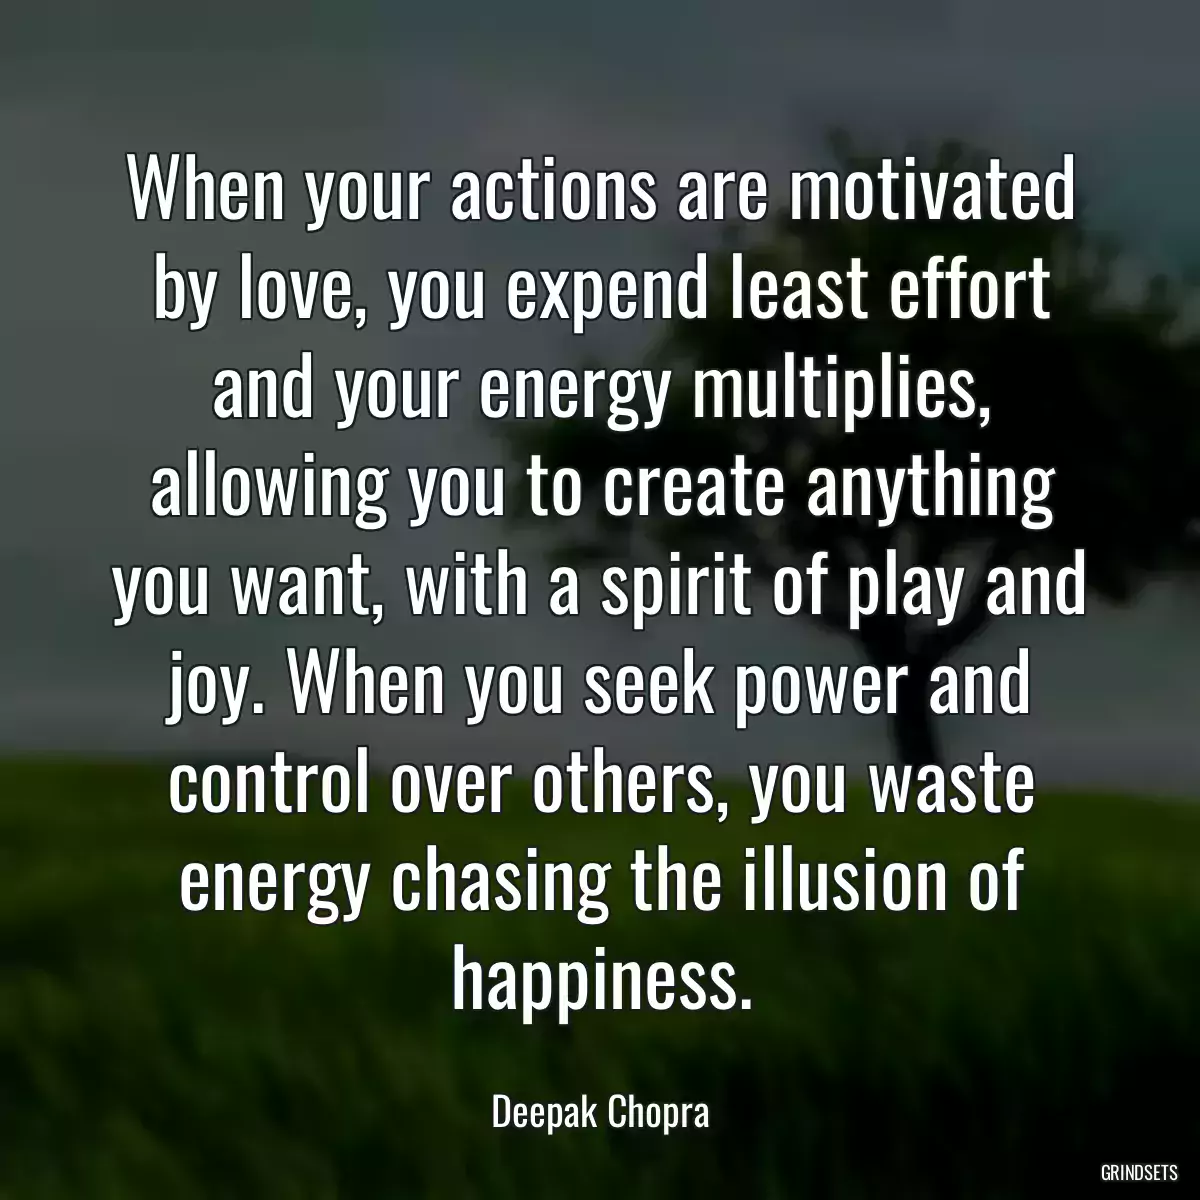 When your actions are motivated by love, you expend least effort and your energy multiplies, allowing you to create anything you want, with a spirit of play and joy. When you seek power and control over others, you waste energy chasing the illusion of happiness.